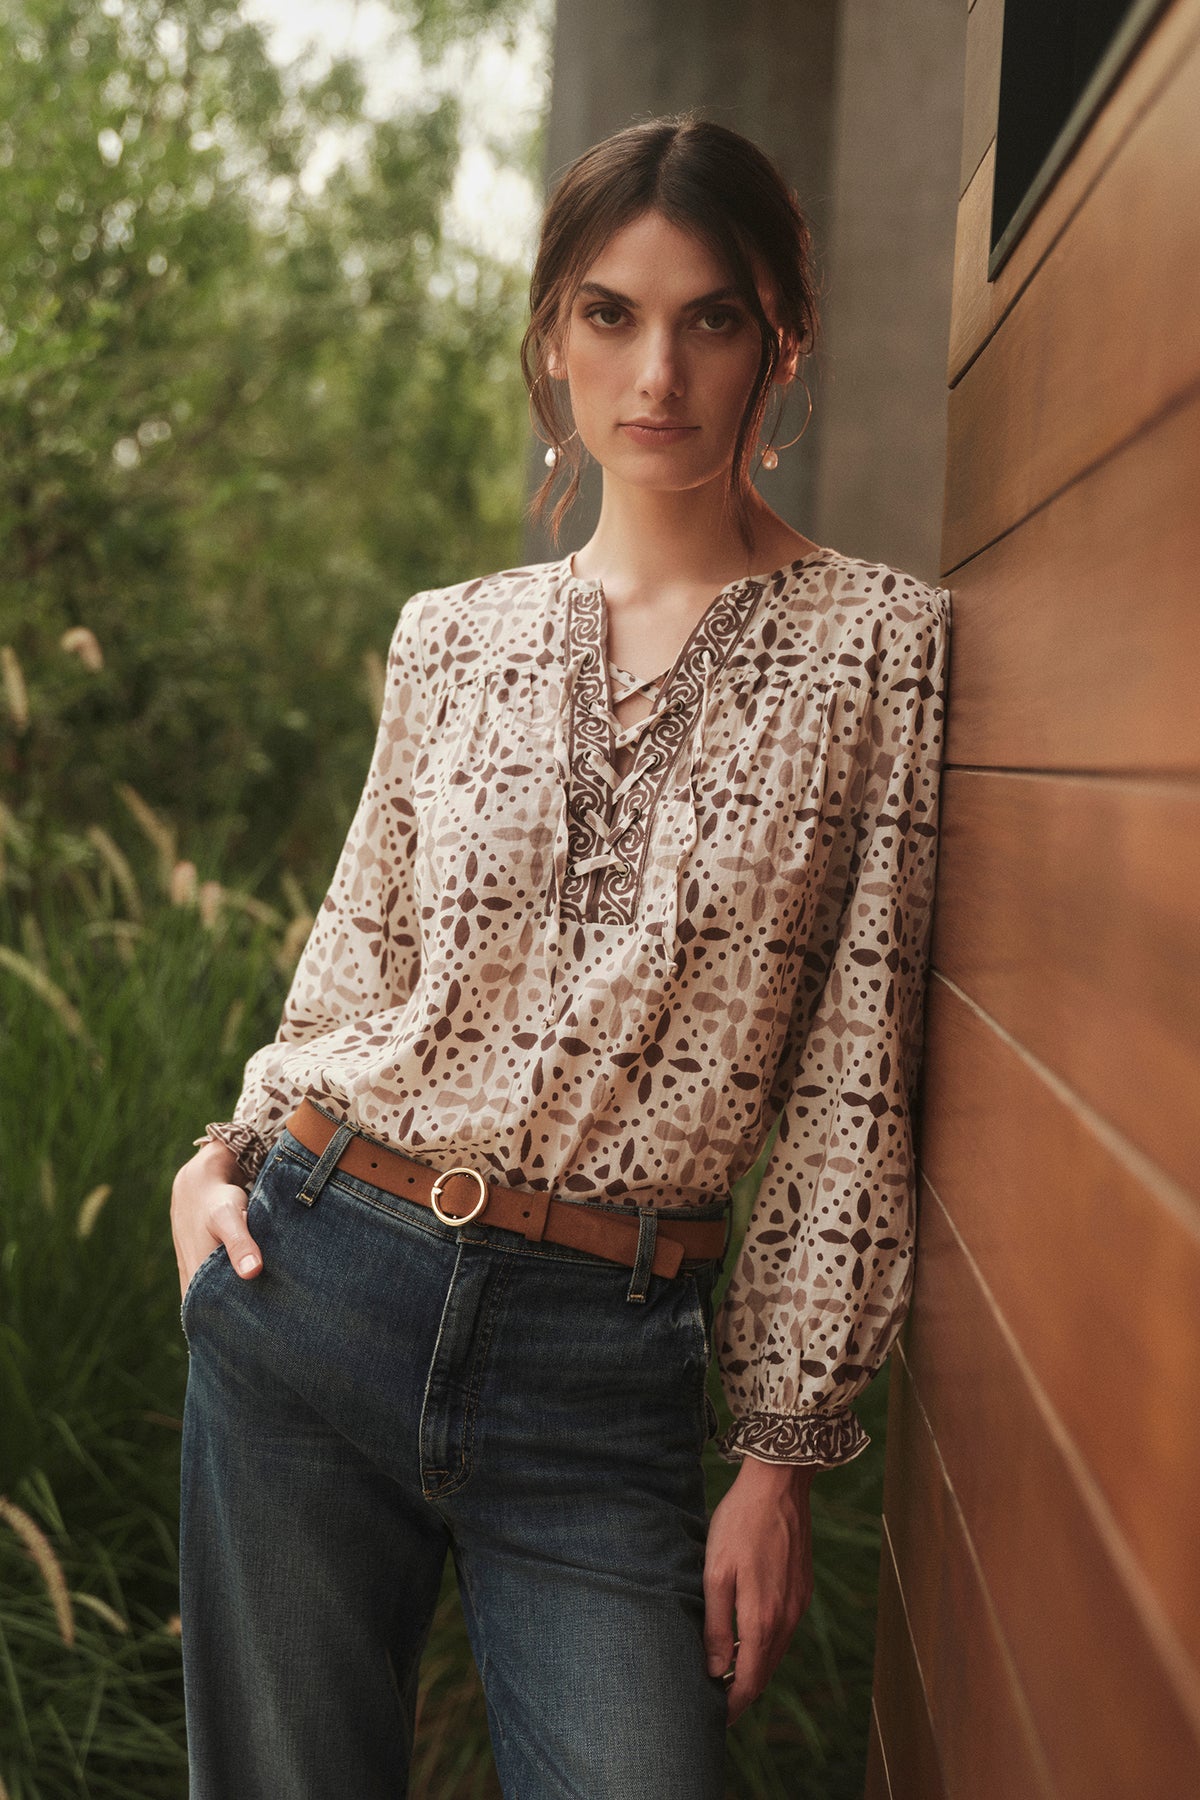 A woman wearing jeans and a AUDETTE PRINTED BOHO TOP by Velvet by Graham & Spencer leaning against a wall.-26887731970241